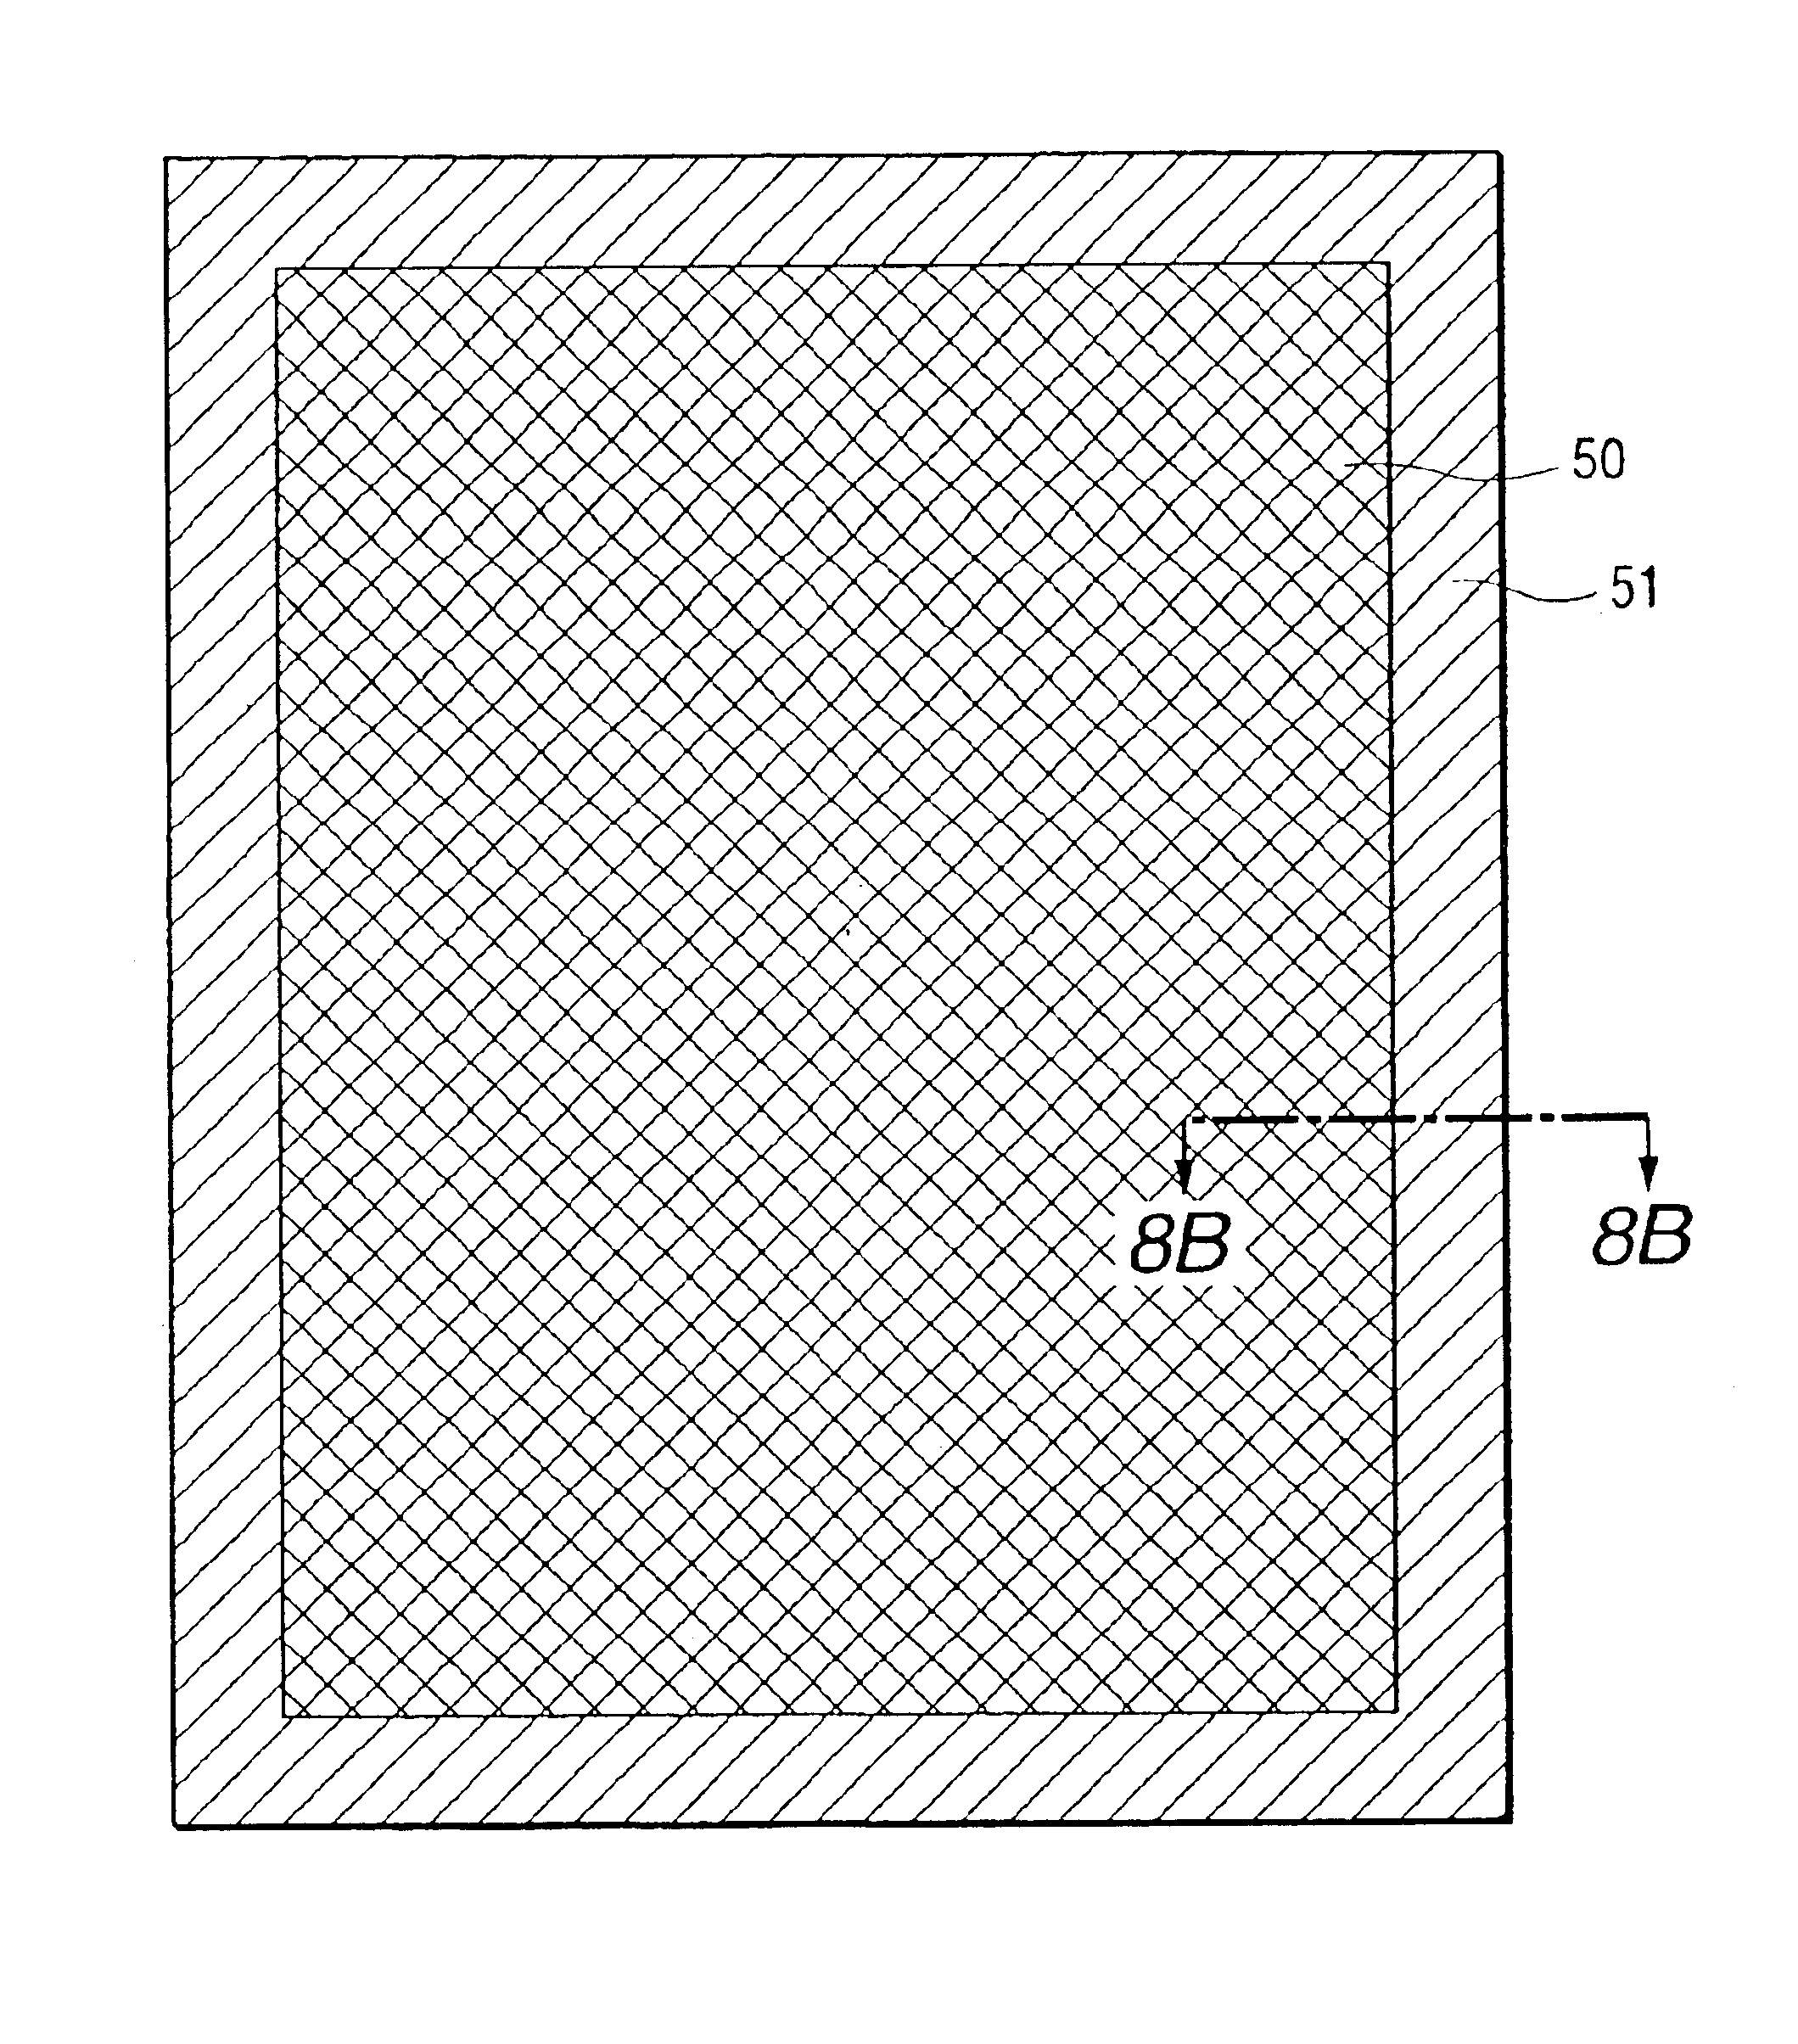 Ink-jet recording apparatus and ink-jet recording process